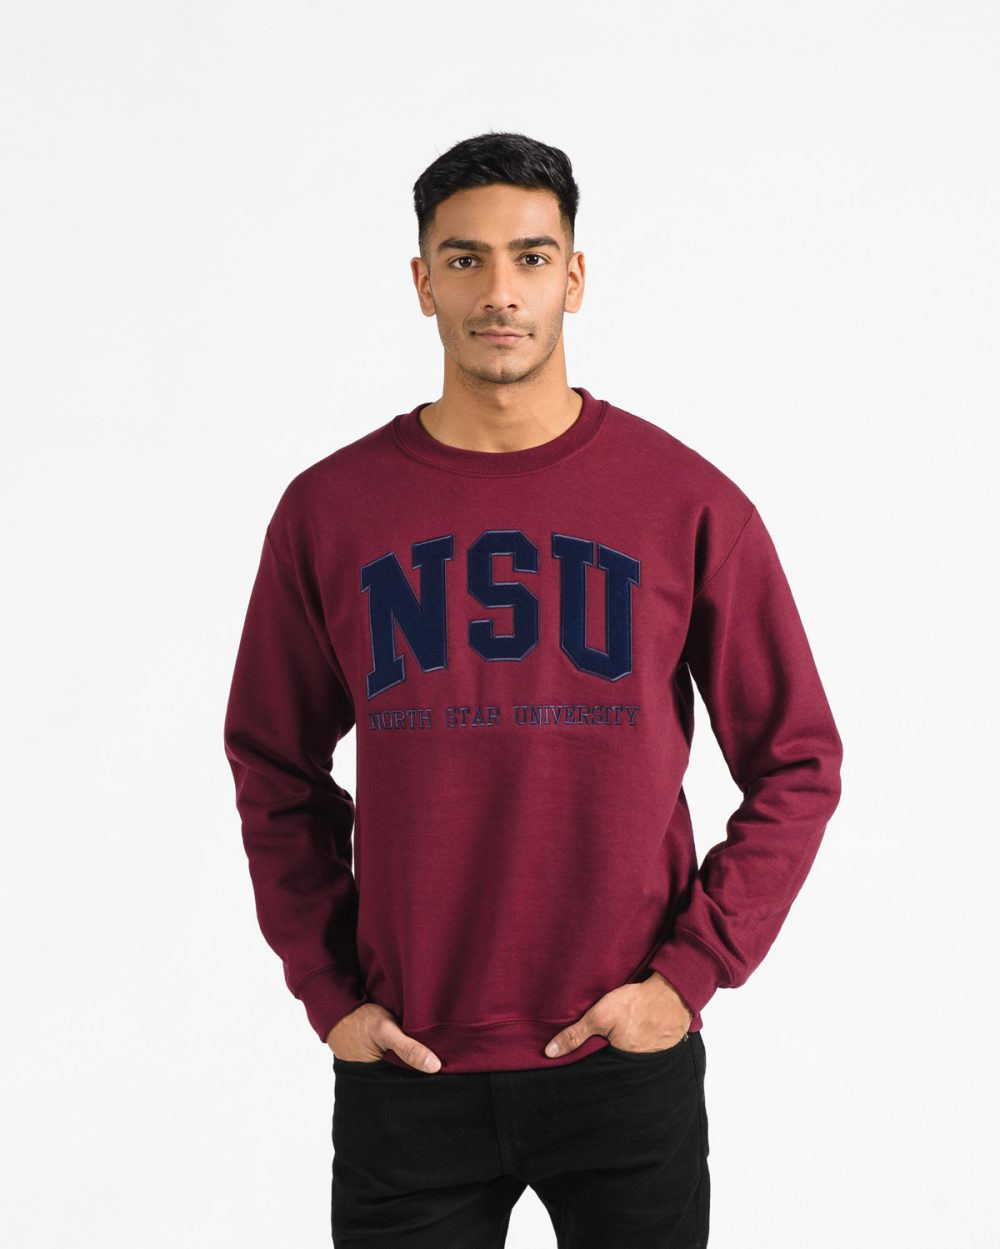 Signature Crew 202 in burgundy with navy embroidery on male model.